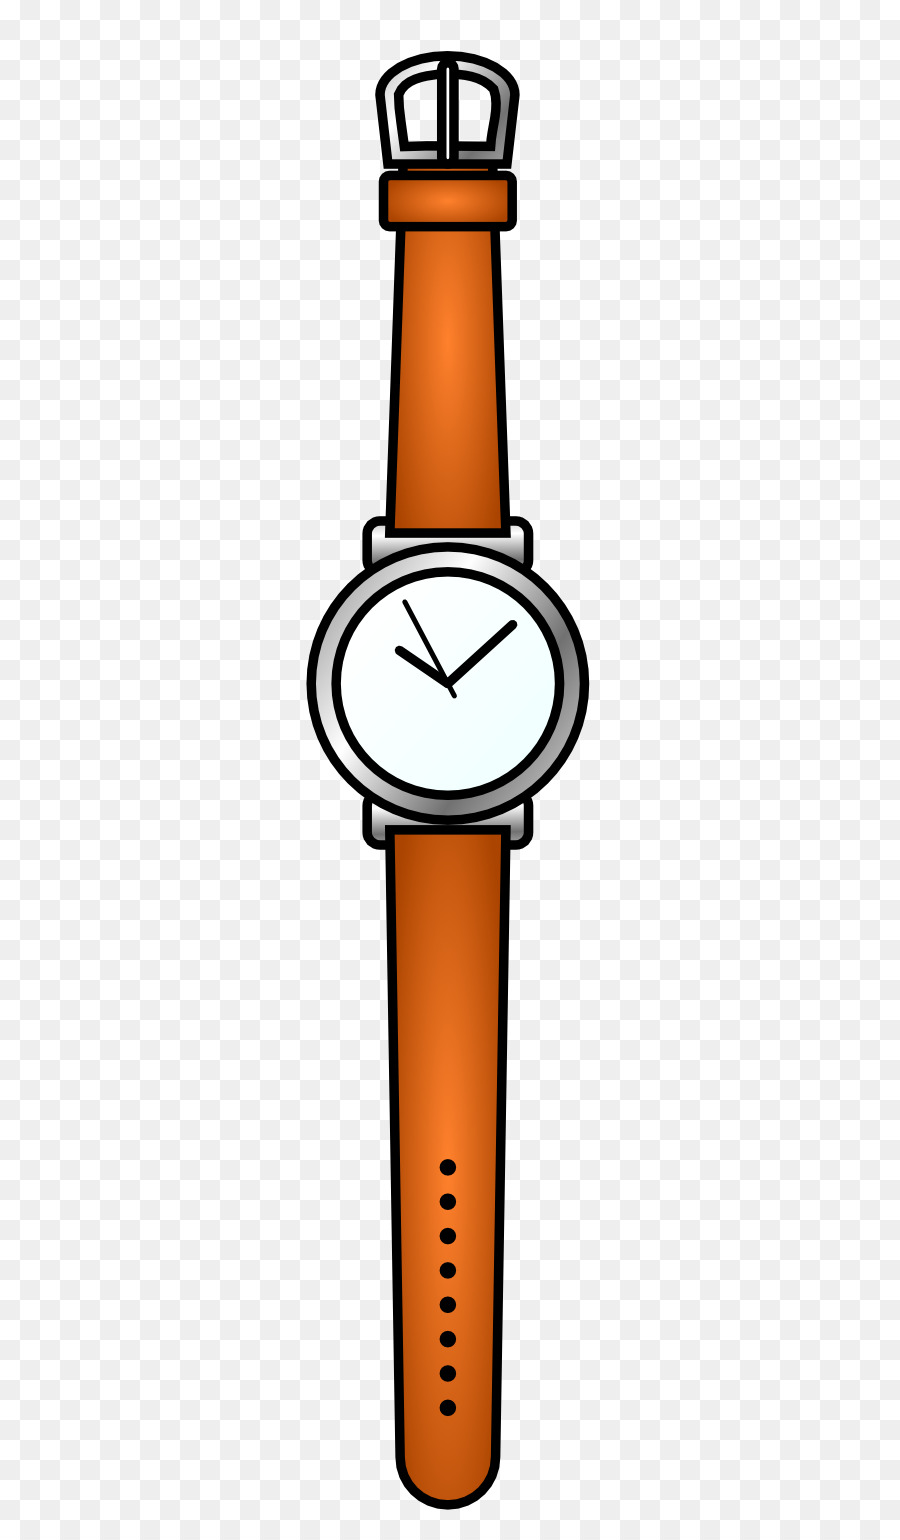 Watch Cartoon png download - 327*1530 - Free Transparent Watch png  Download. - CleanPNG / KissPNG